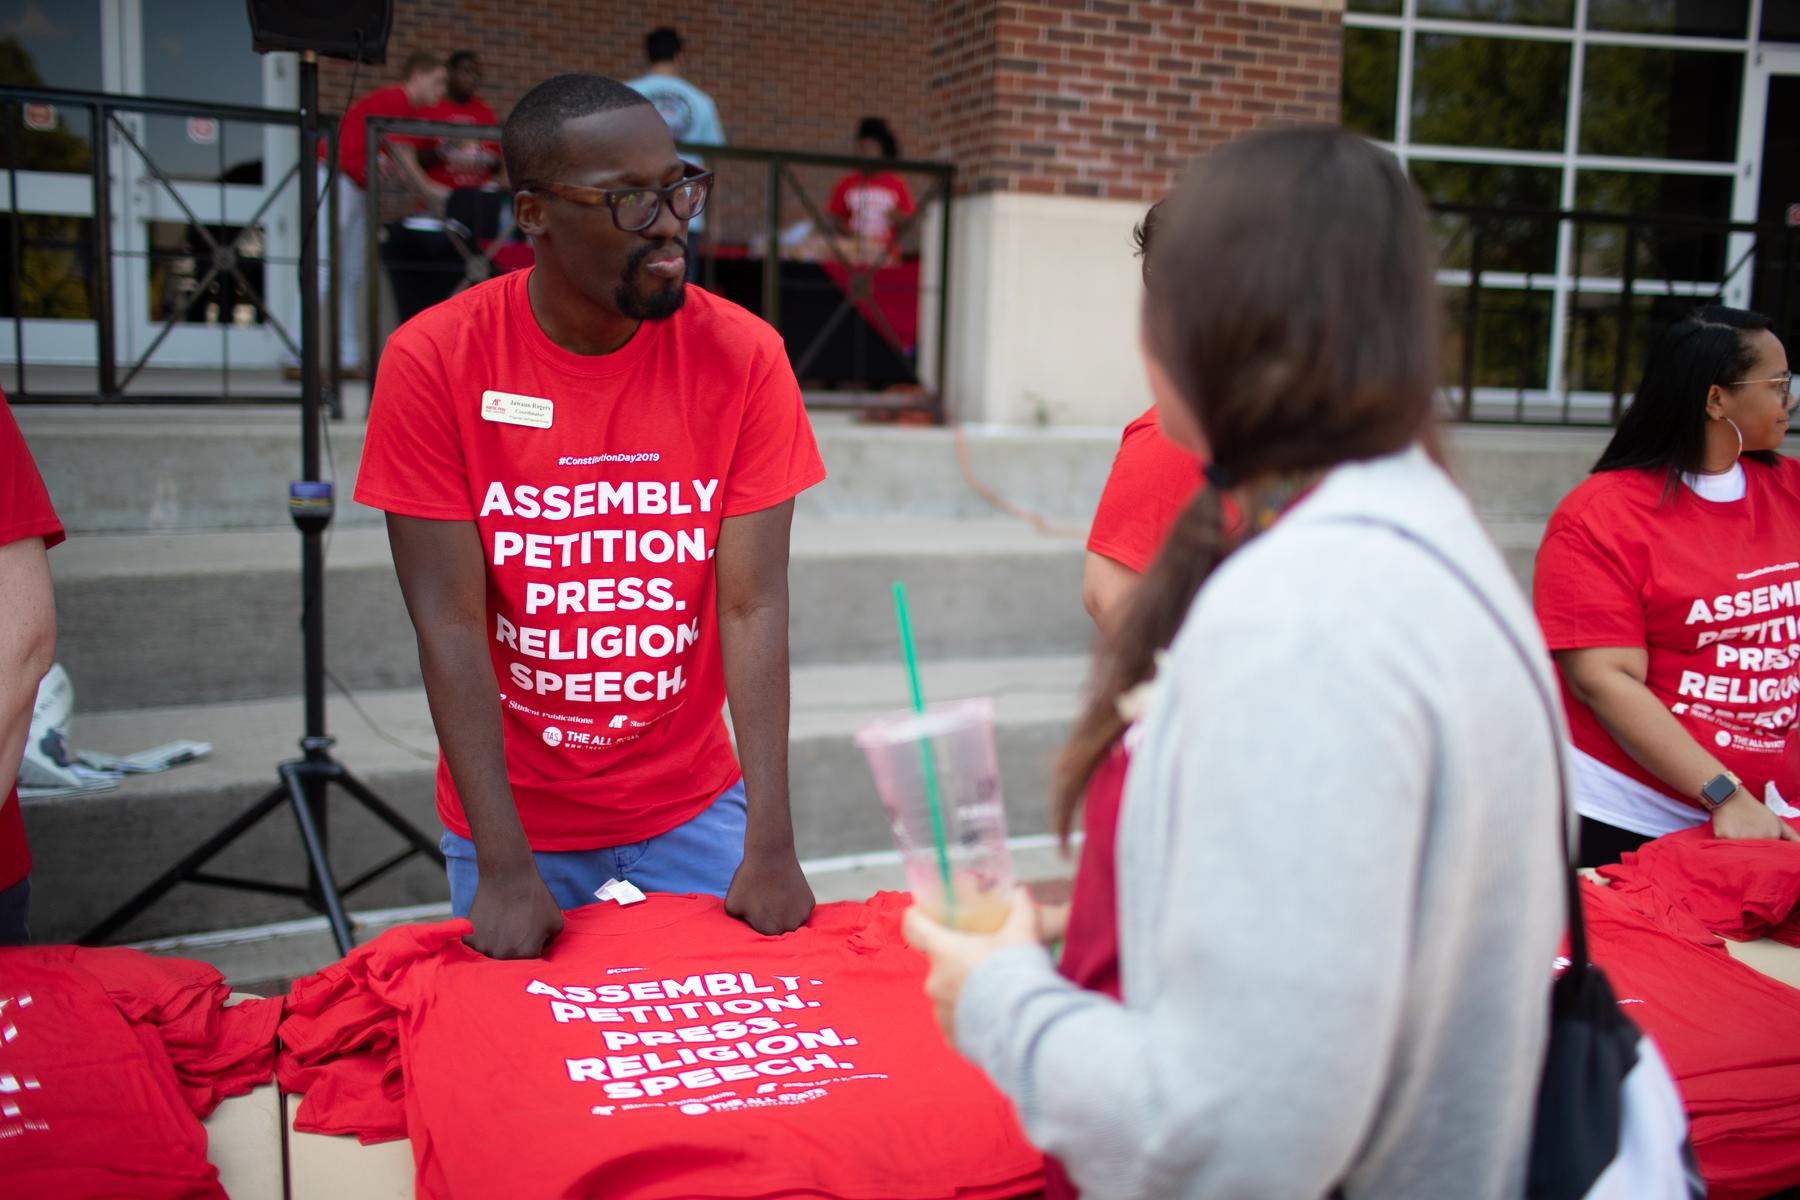 Austin Peay This Week: Constitution Day event to examine civic responsibility to each other